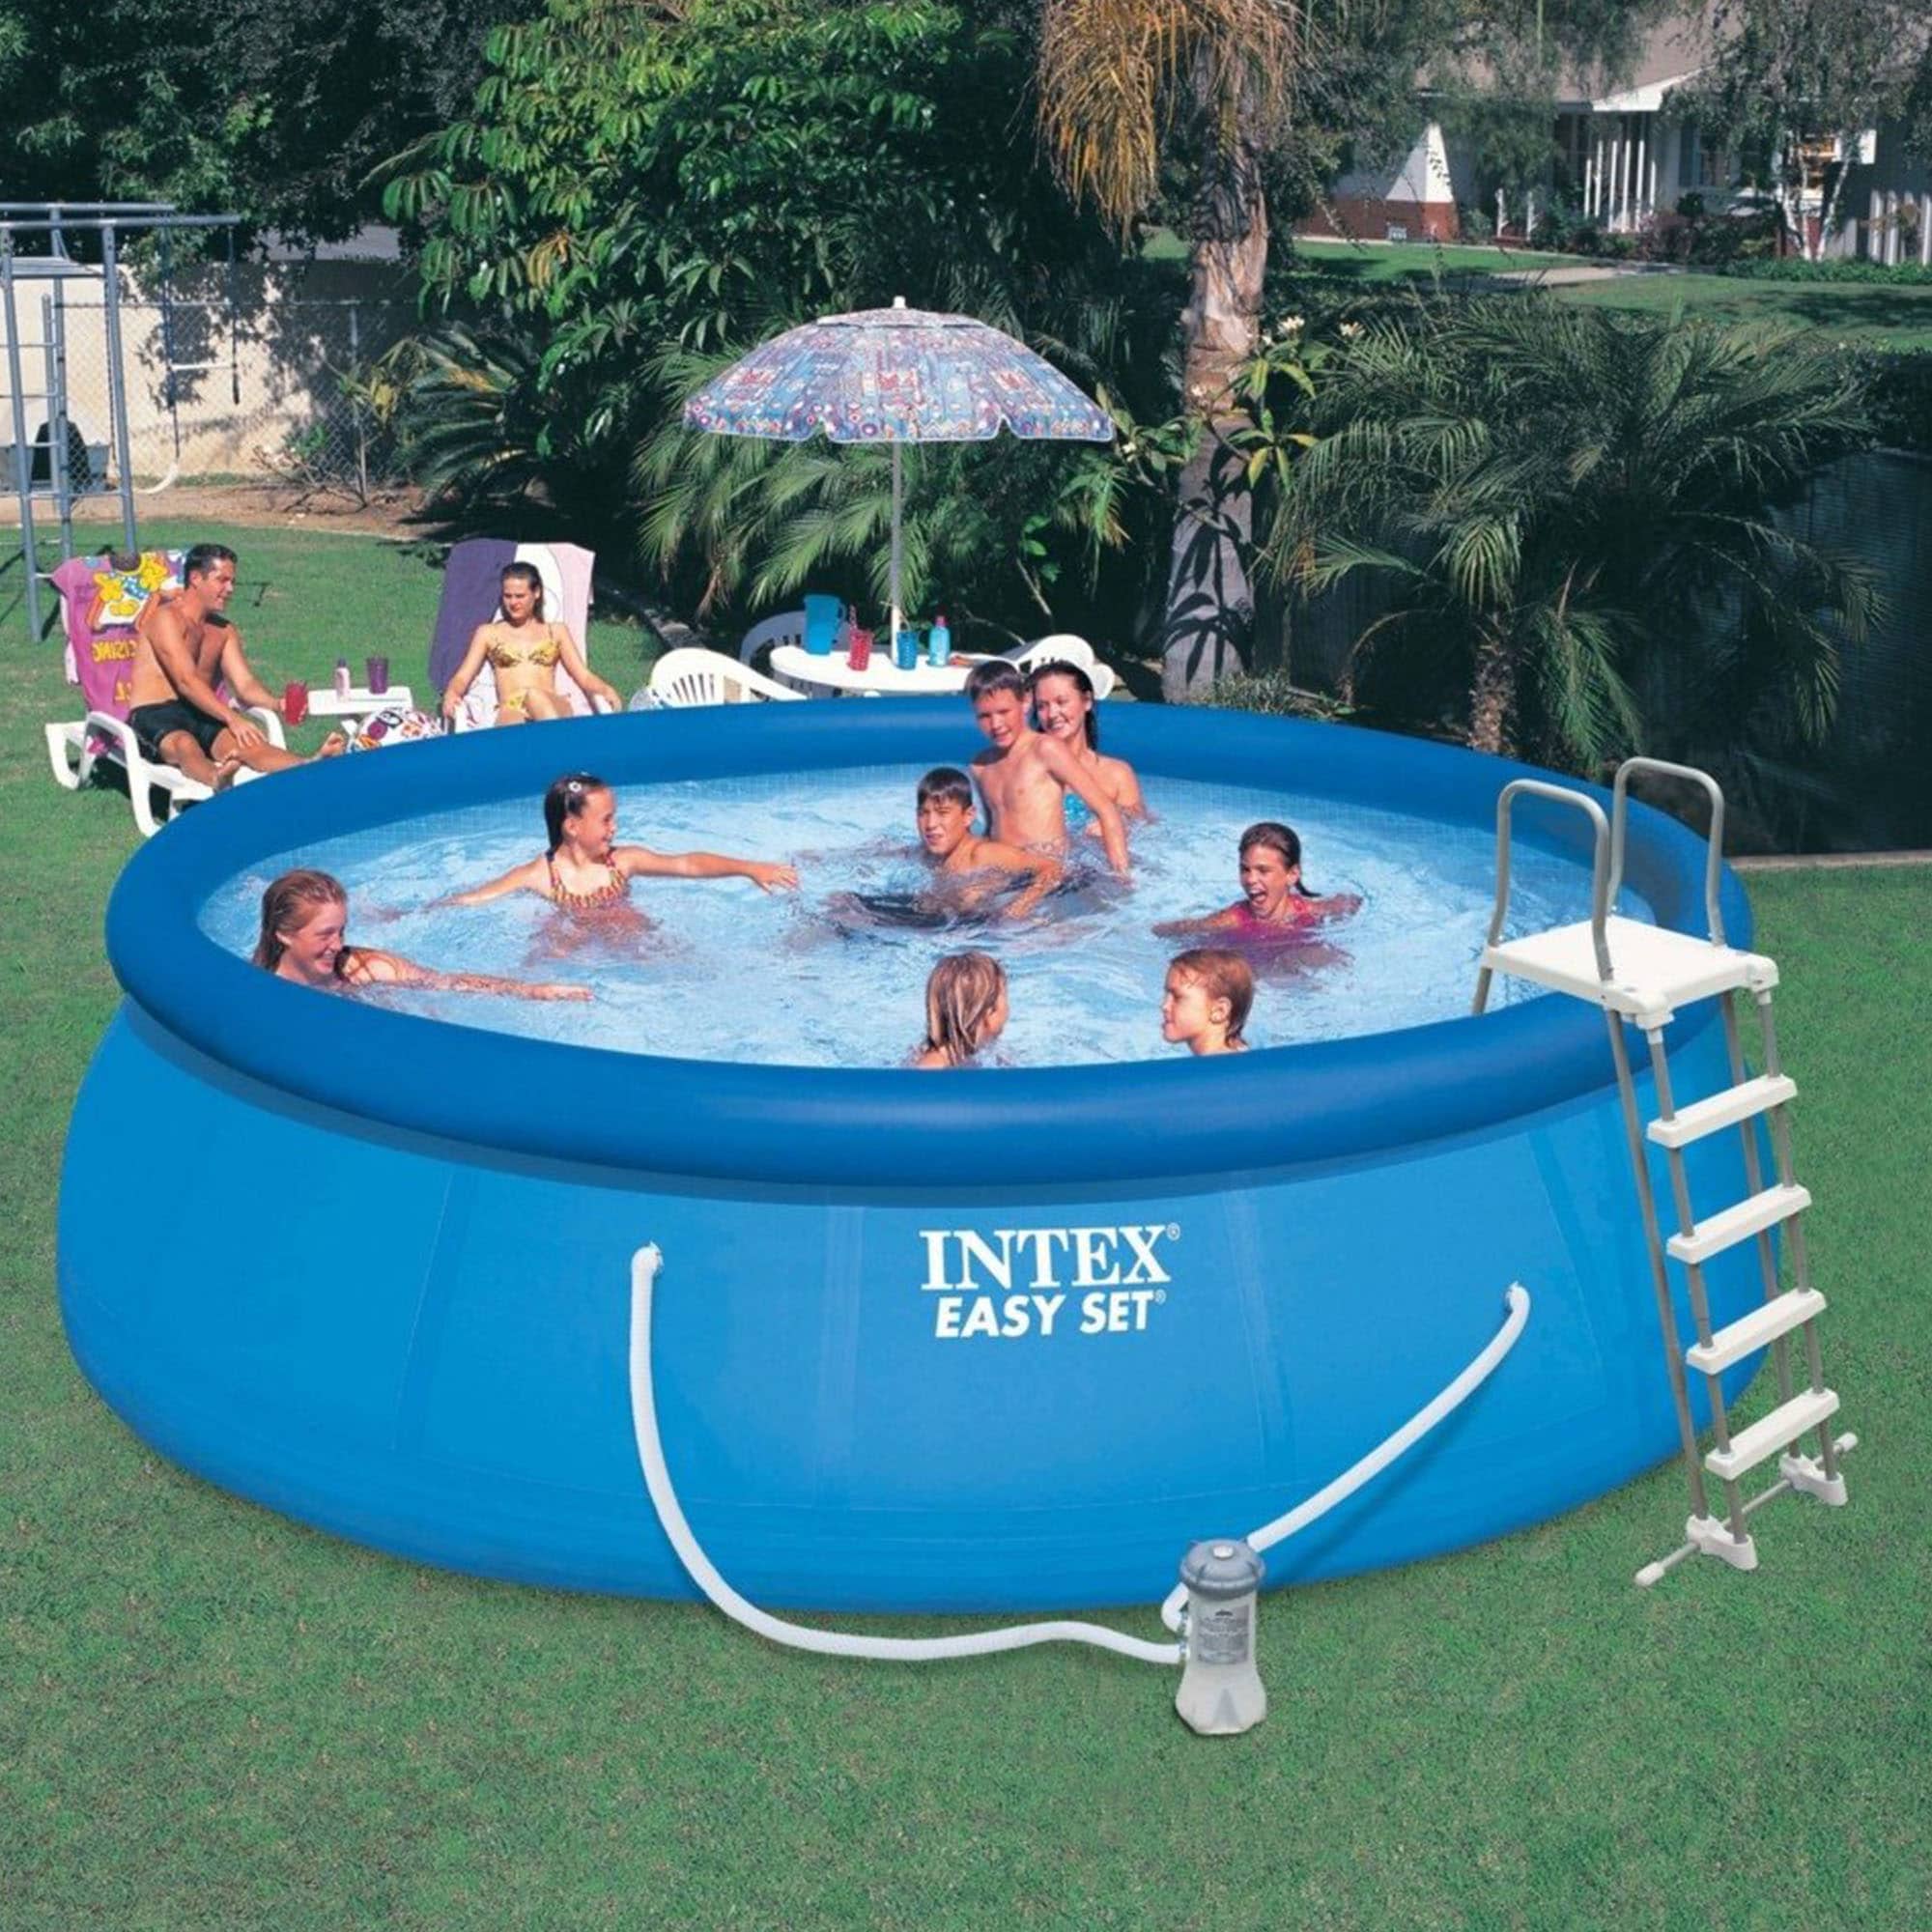 Omkostningsprocent pumpe Stratford på Avon Intex Easy Set 15-ft x 15-ft x 48-in Inflatable Top Ring Round Above-Ground  Pool with Filter Pump,Ground Cloth,Pool Cover and Ladder at Lowes.com